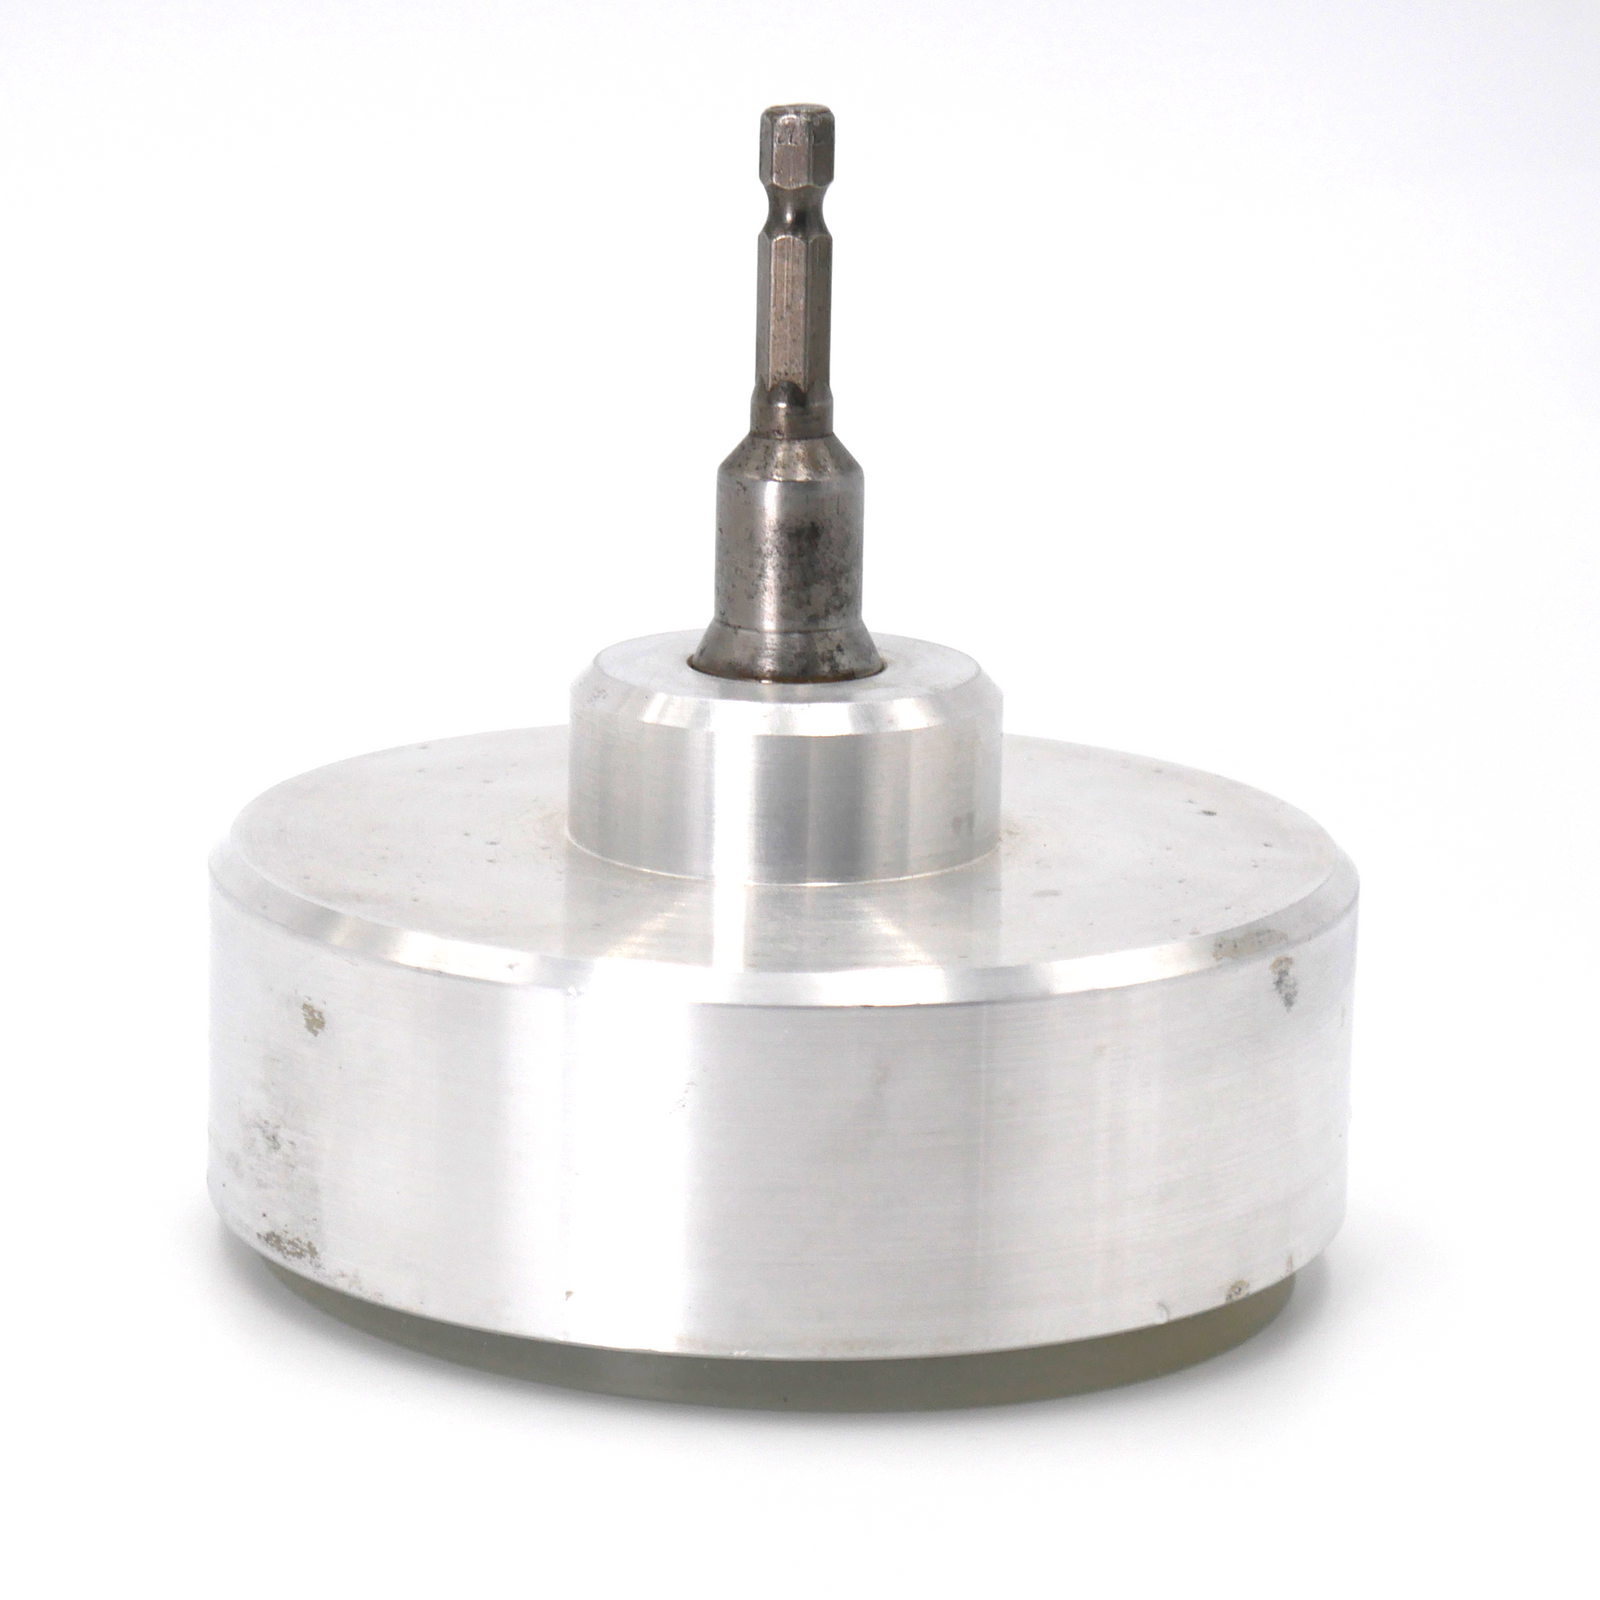 Capping chuck size 100 compatible with manual cappers and pneumatic drills